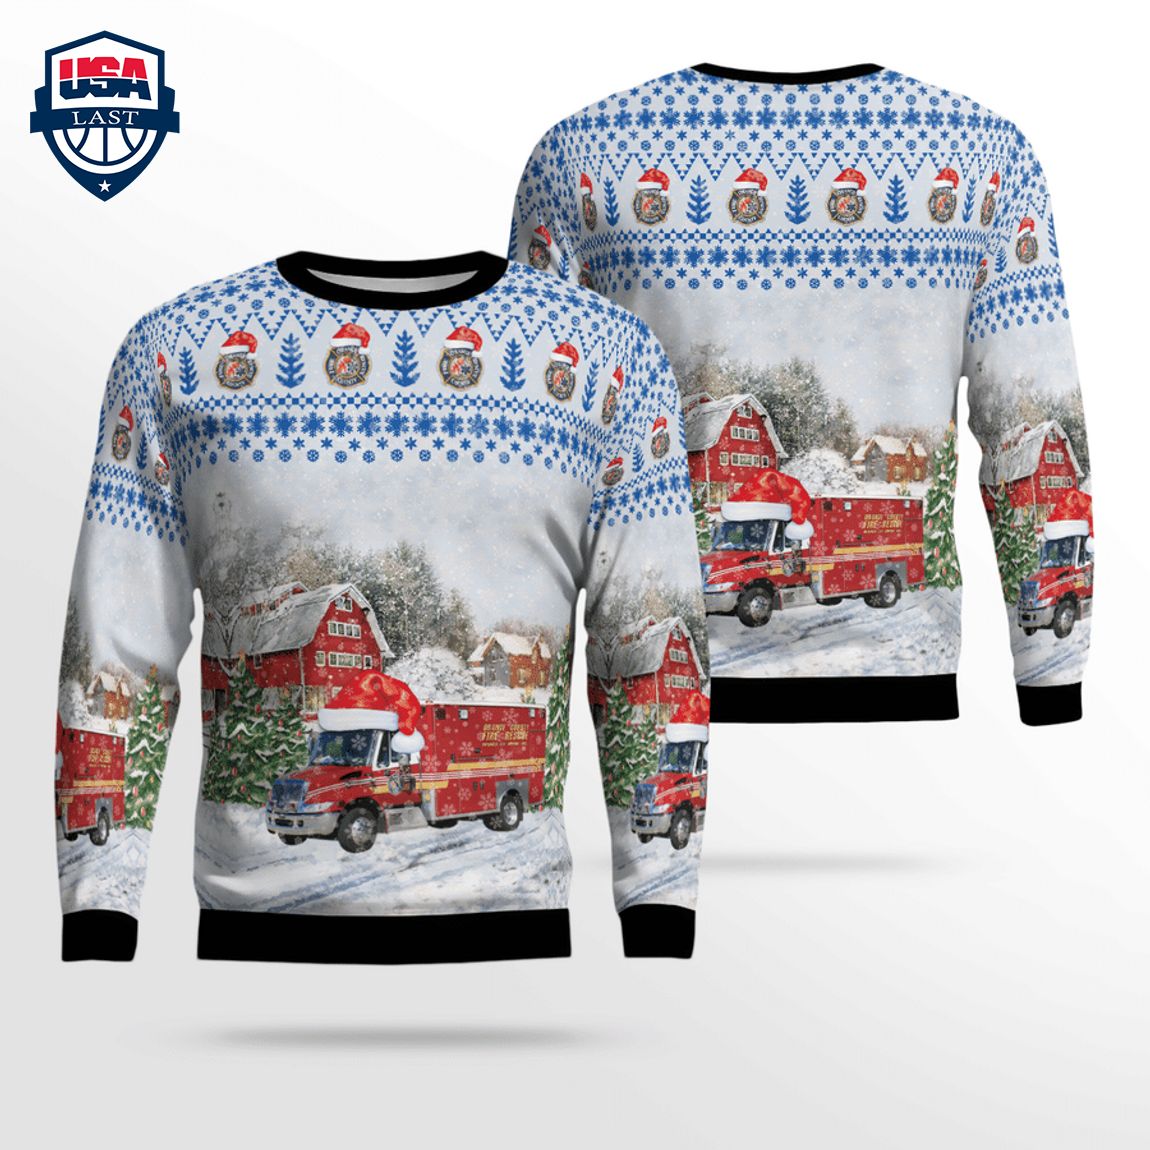 Florida Orange County Fire Rescue Paramedic 3D Christmas Sweater